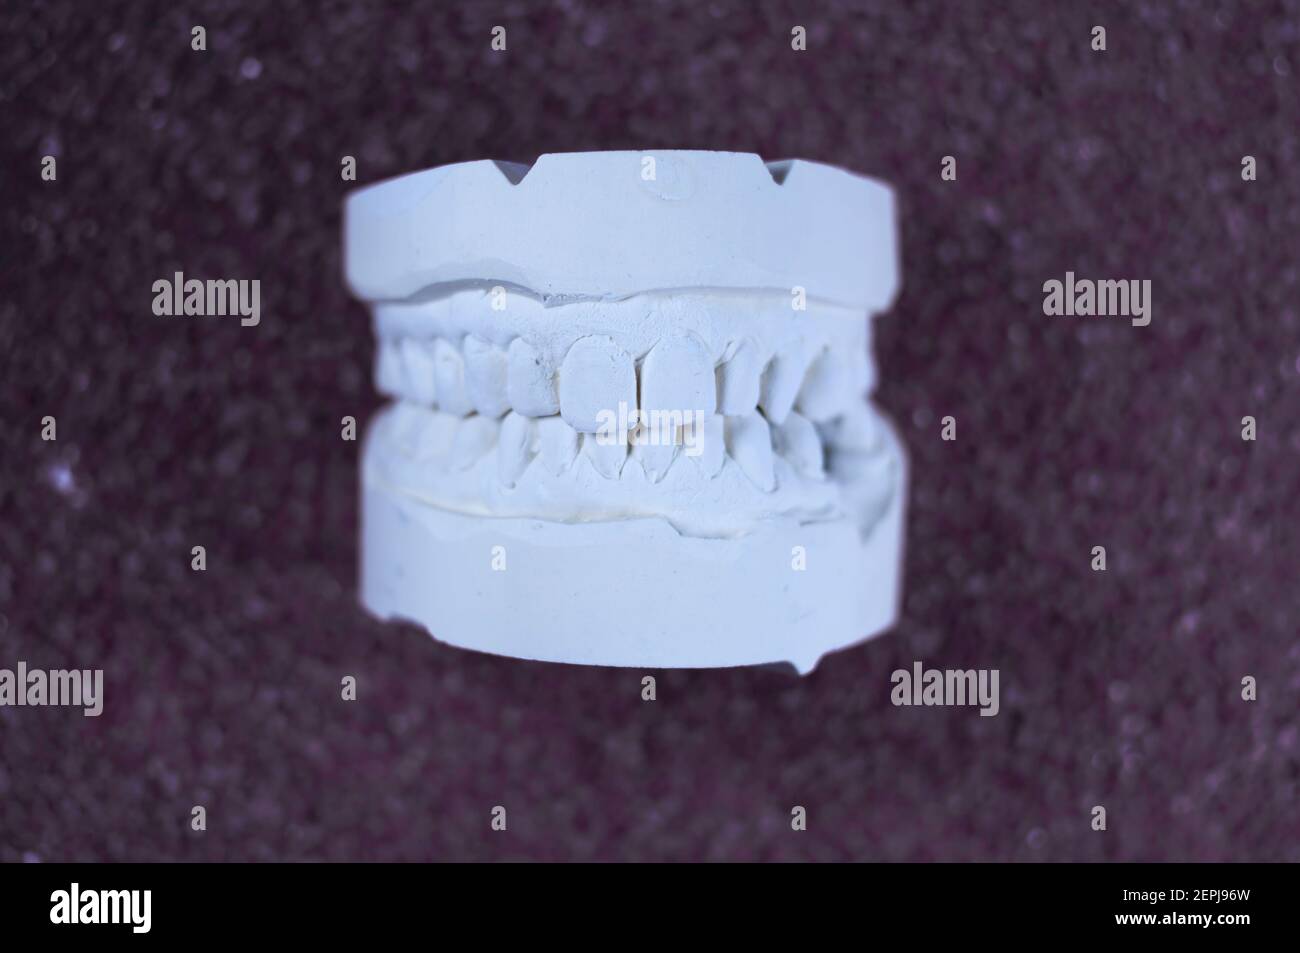 still life of a denture print. frontal view. background purple stones Stock Photo